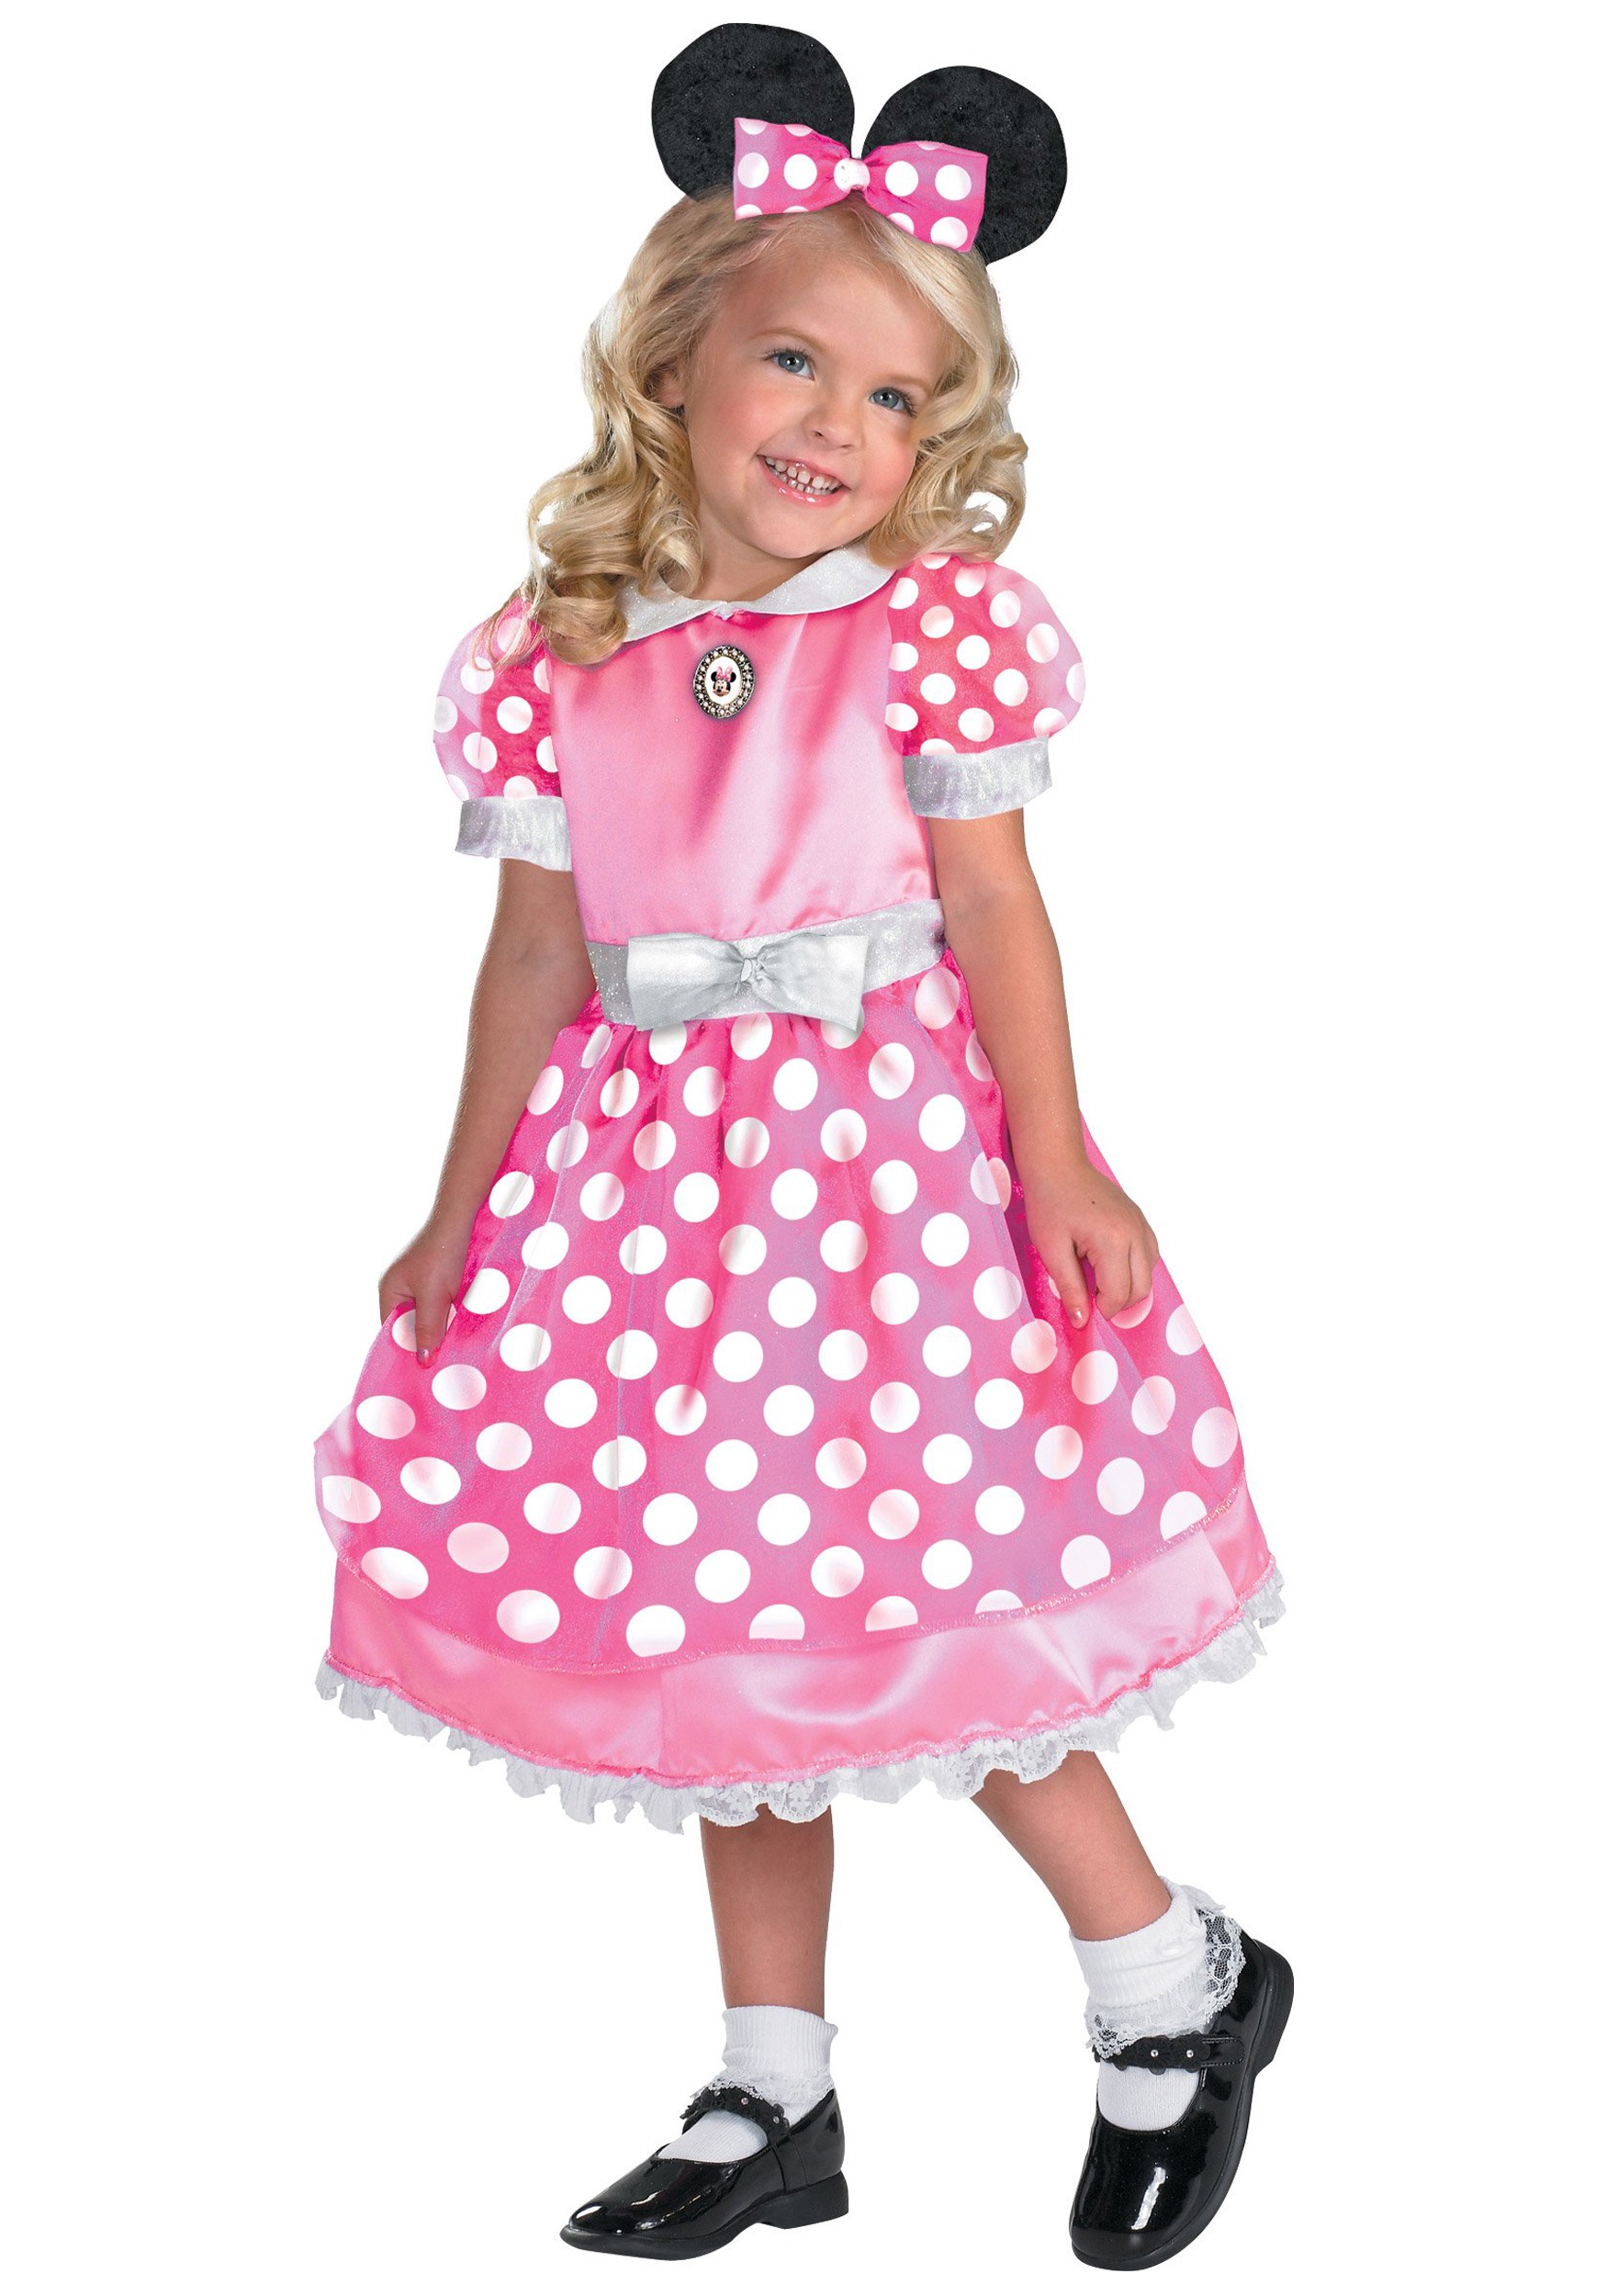 Minnie Mouse In Pink Polka Dot Dress